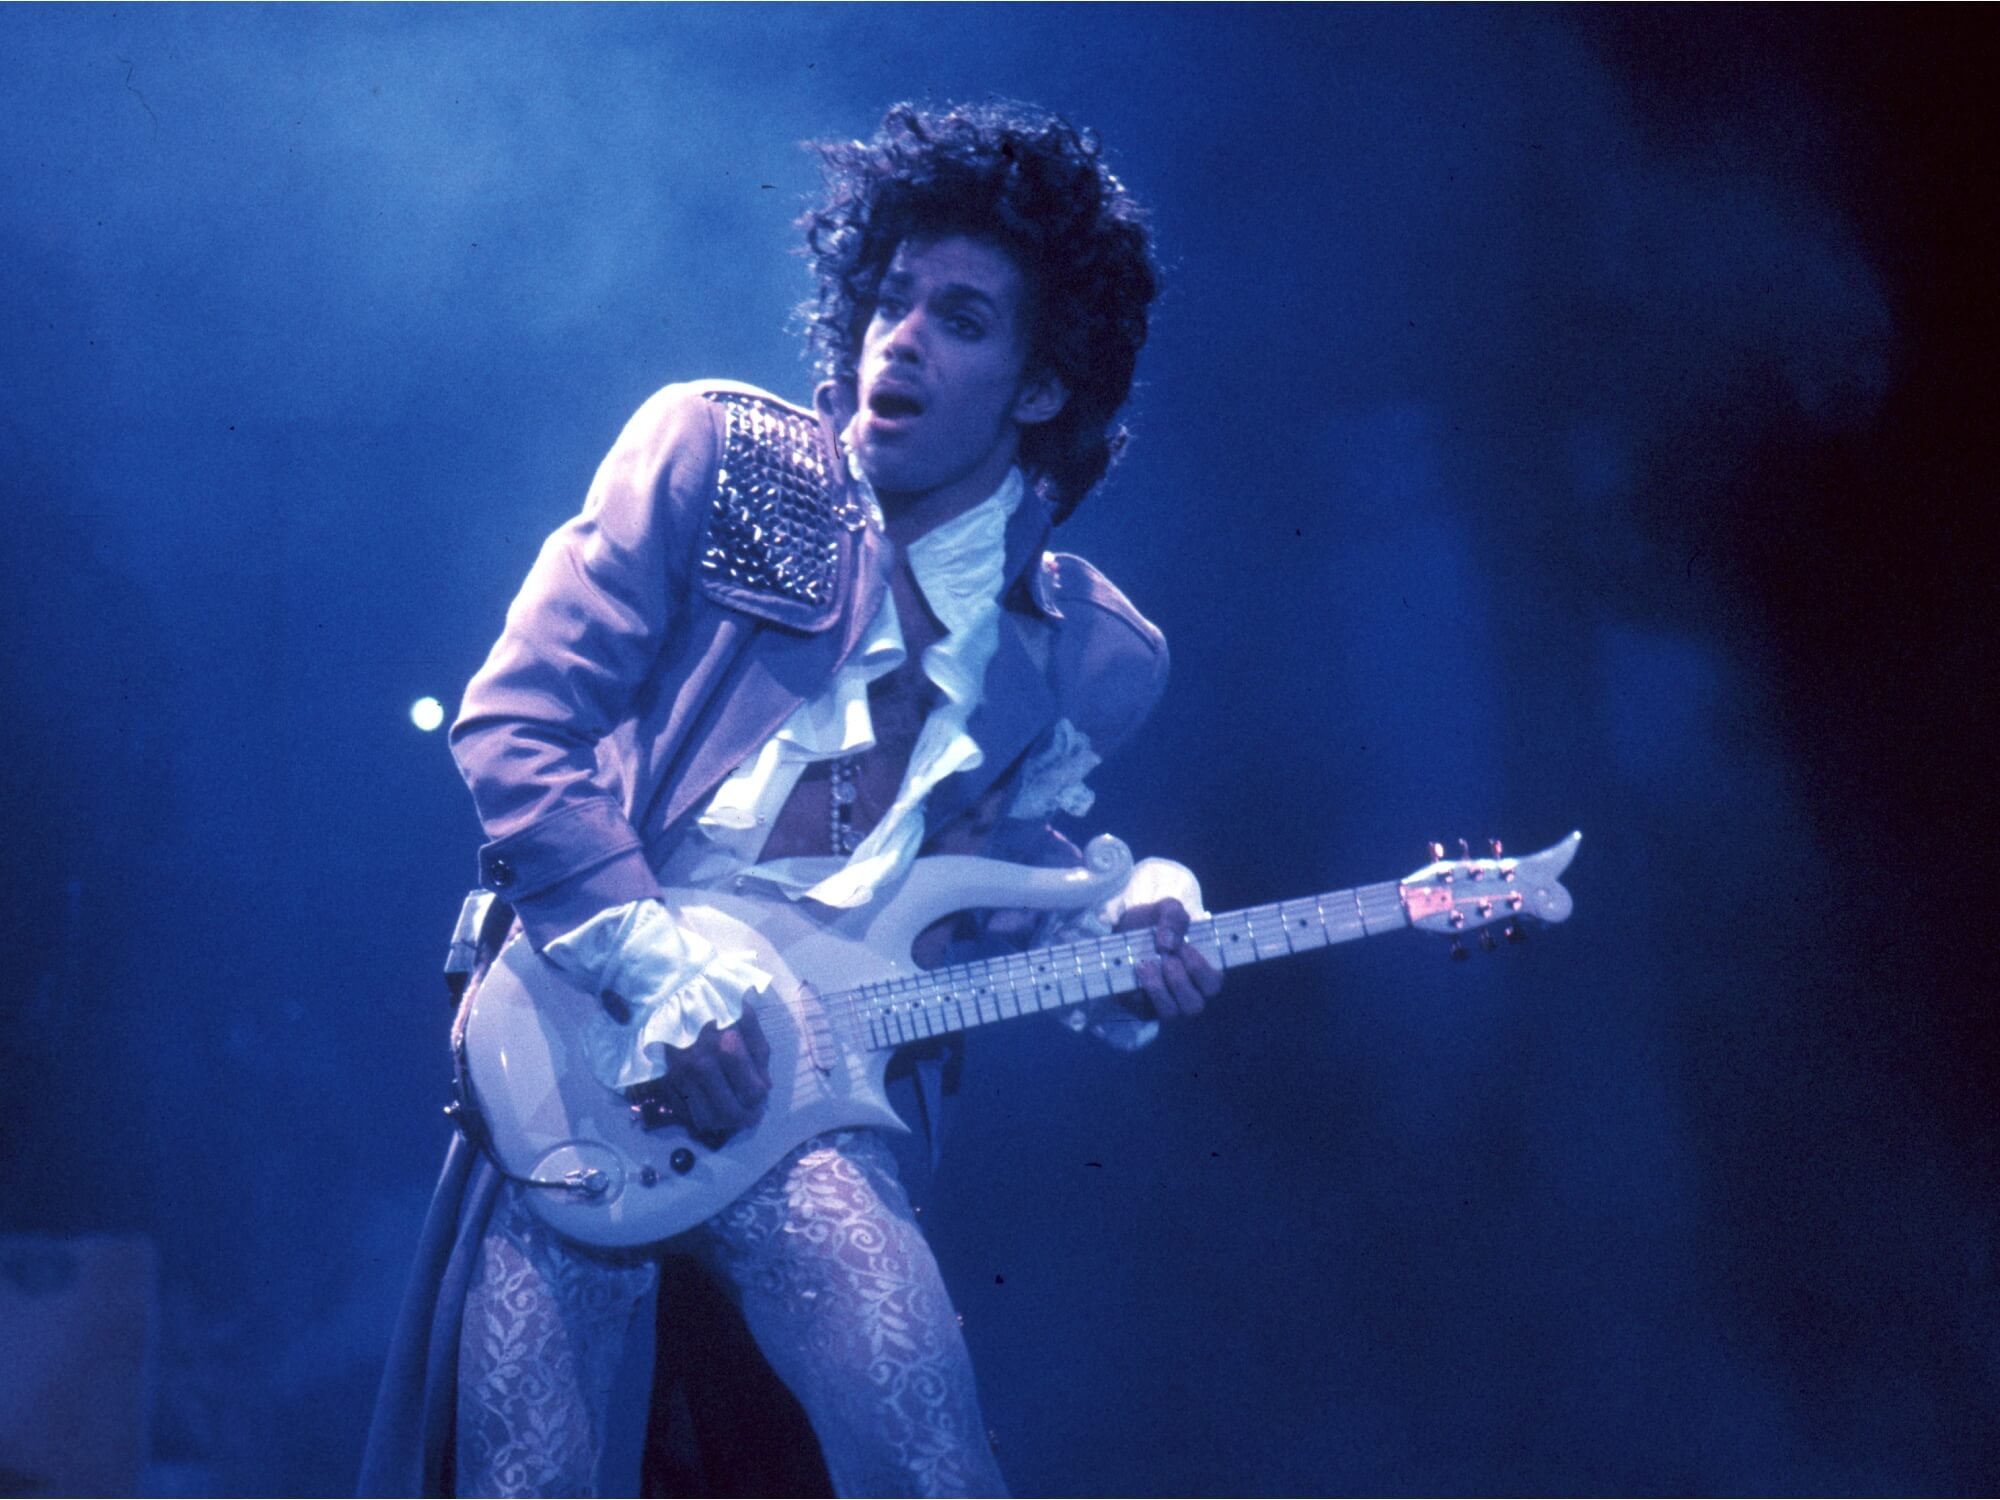 Prince with the Cloud Guitar.